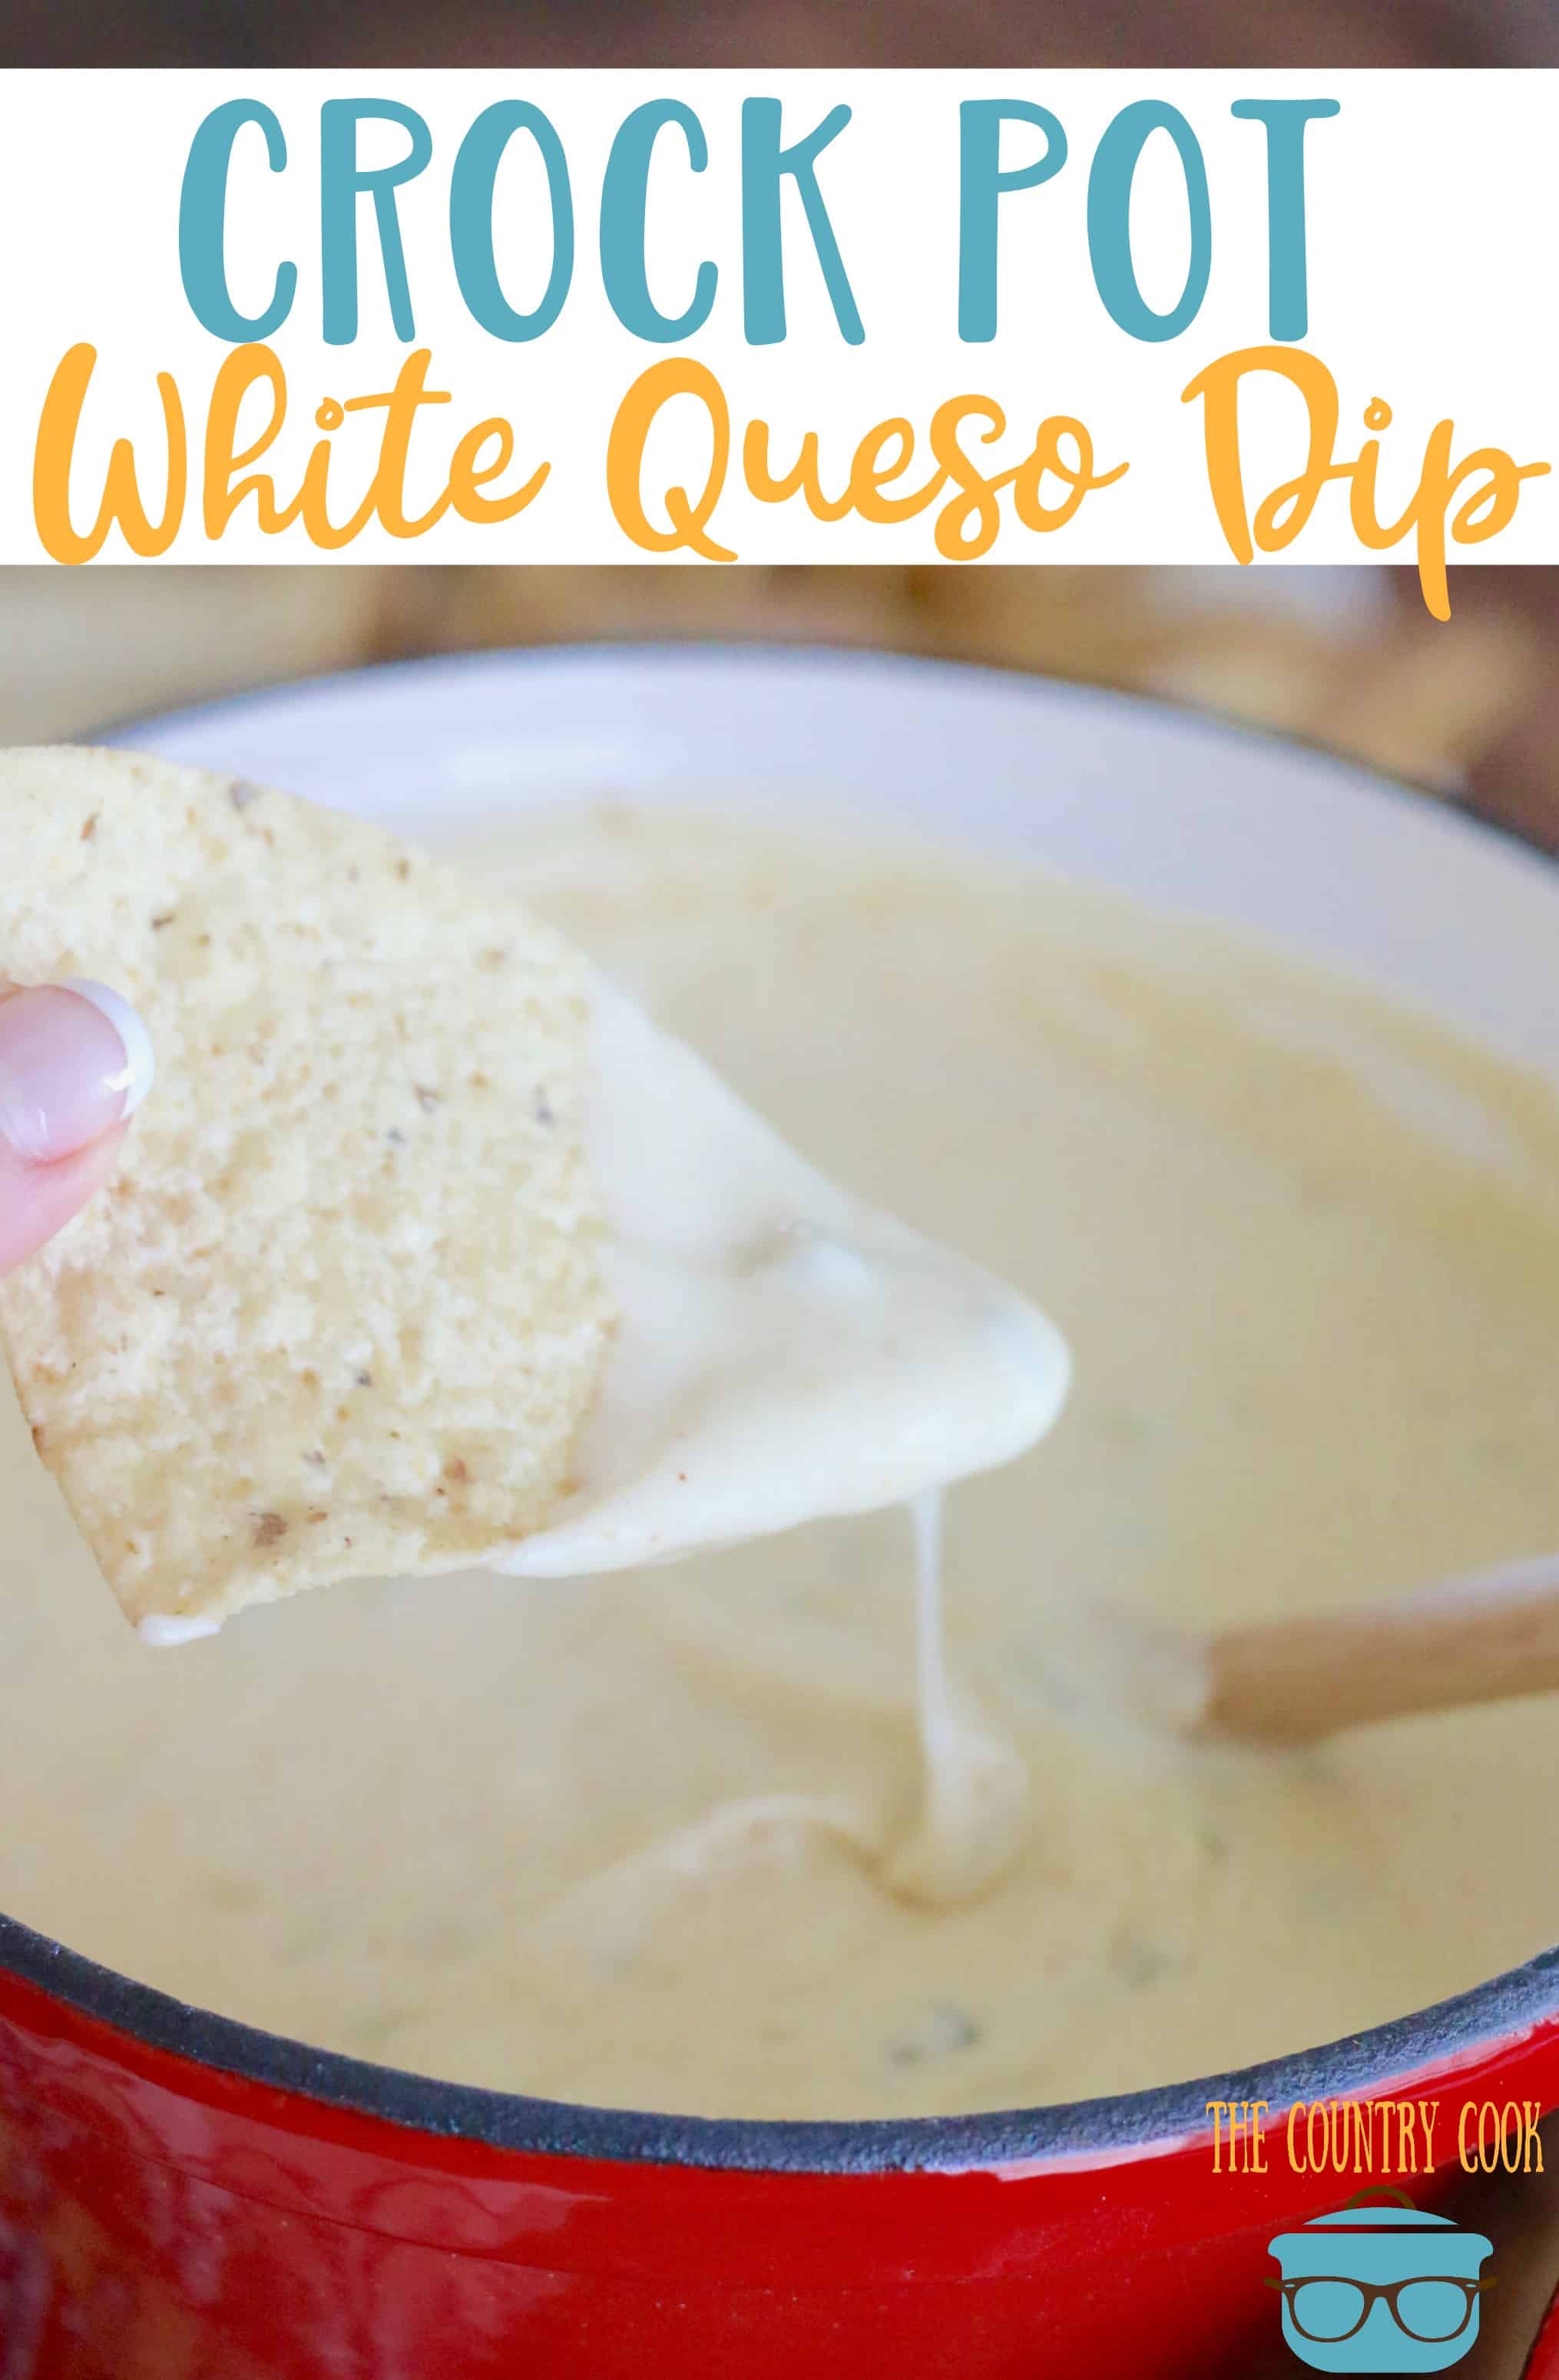 Restaurant Style Crock Pot White Queso Dip recipe from The Country Cook